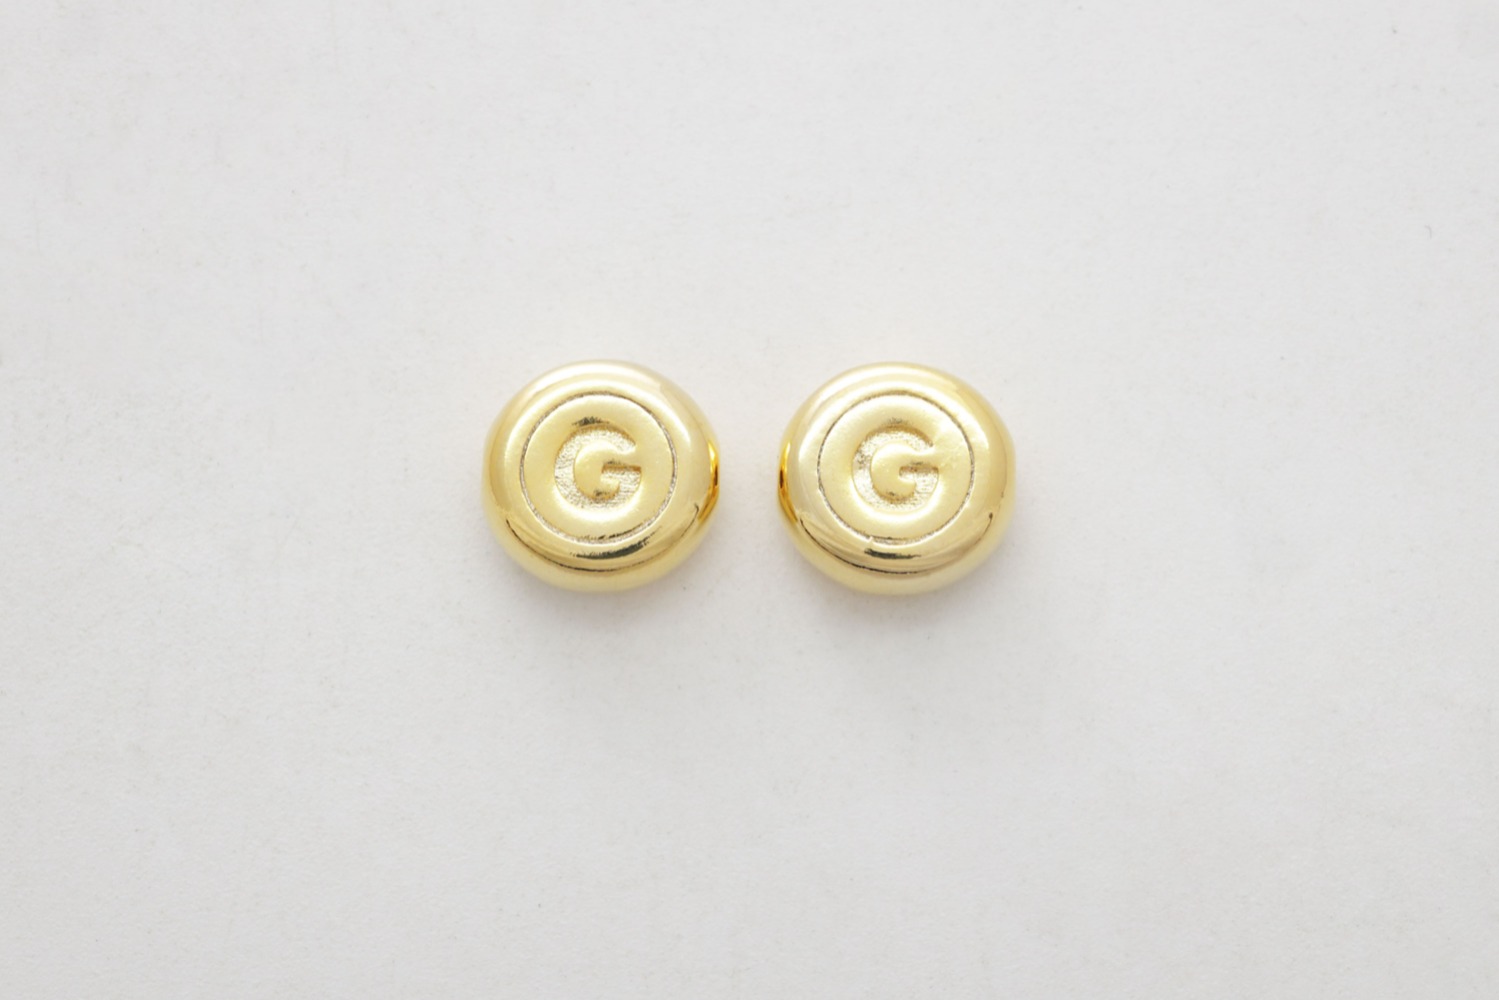 [AG-G21] Metal alphabet beads G, Brass, Nickel free, Jewelry making supplies, Capital letter charm, Initial charm, 1 piece